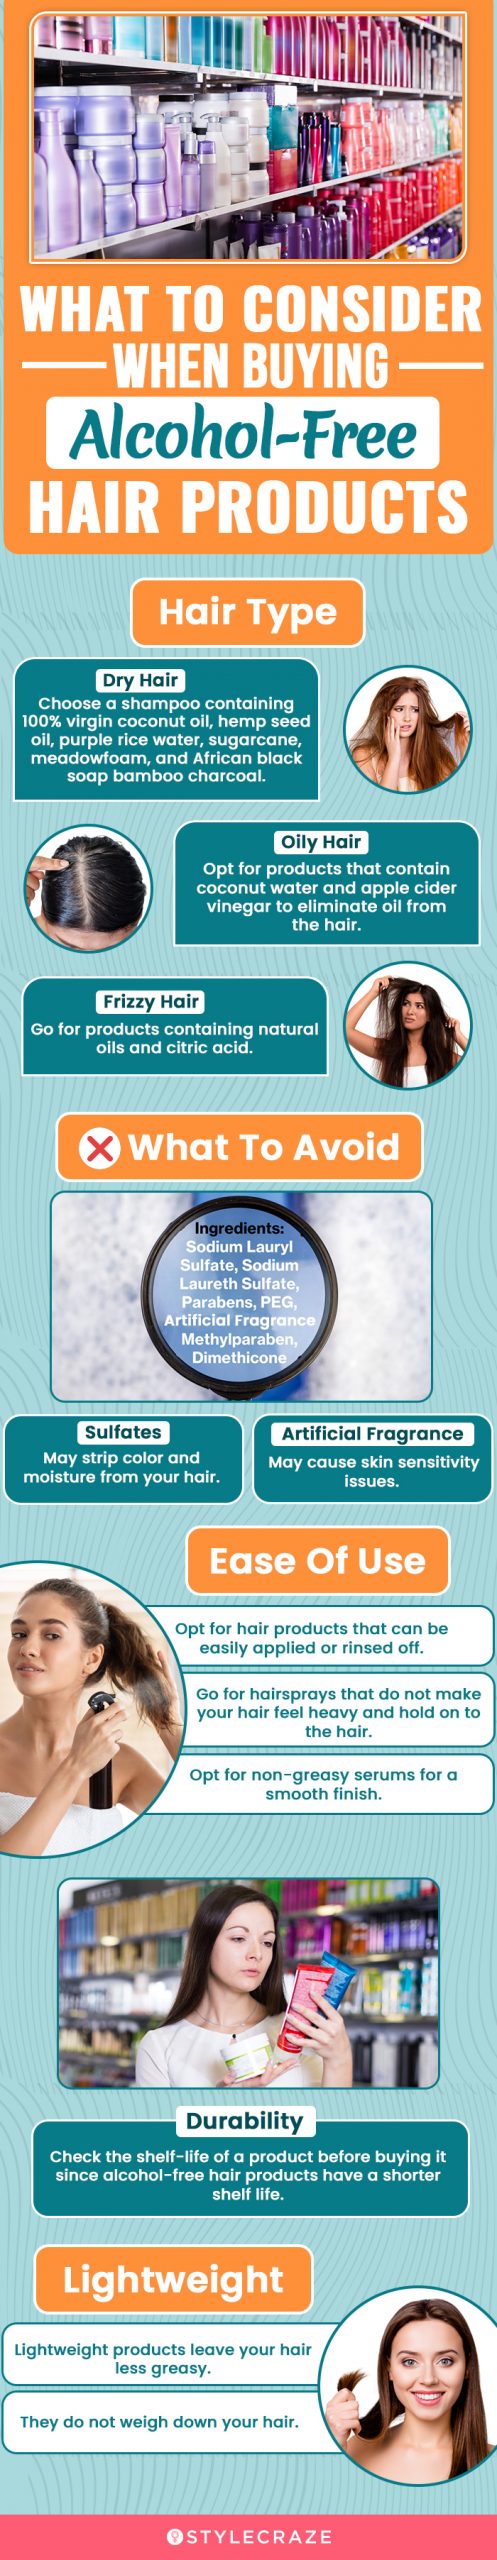 What To Consider When Buying Alcohol-Free Hair Products [infographic]